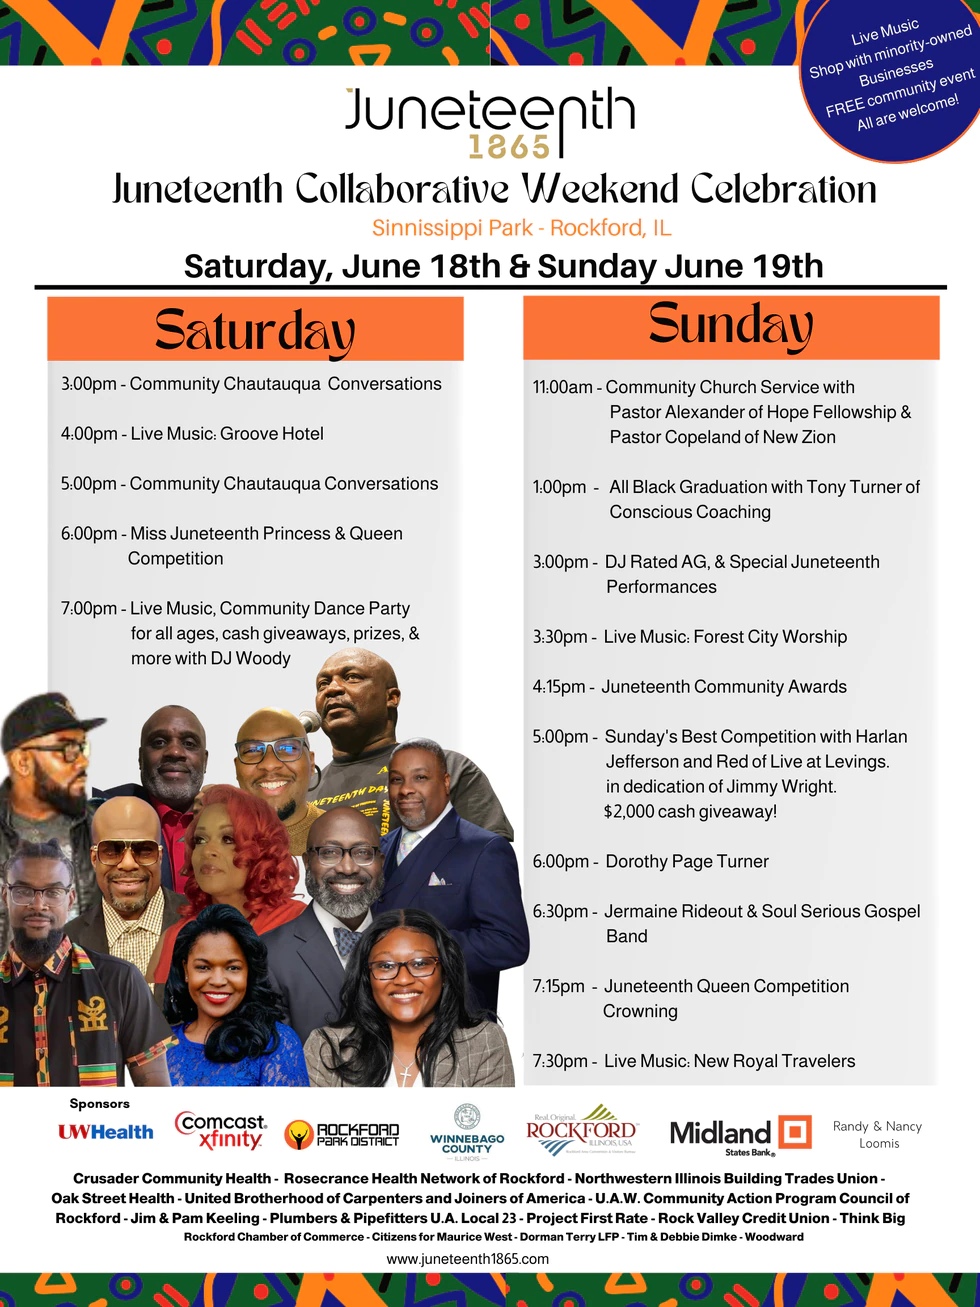 Juneteenth celebrations, events coming to Sinnissippi Park